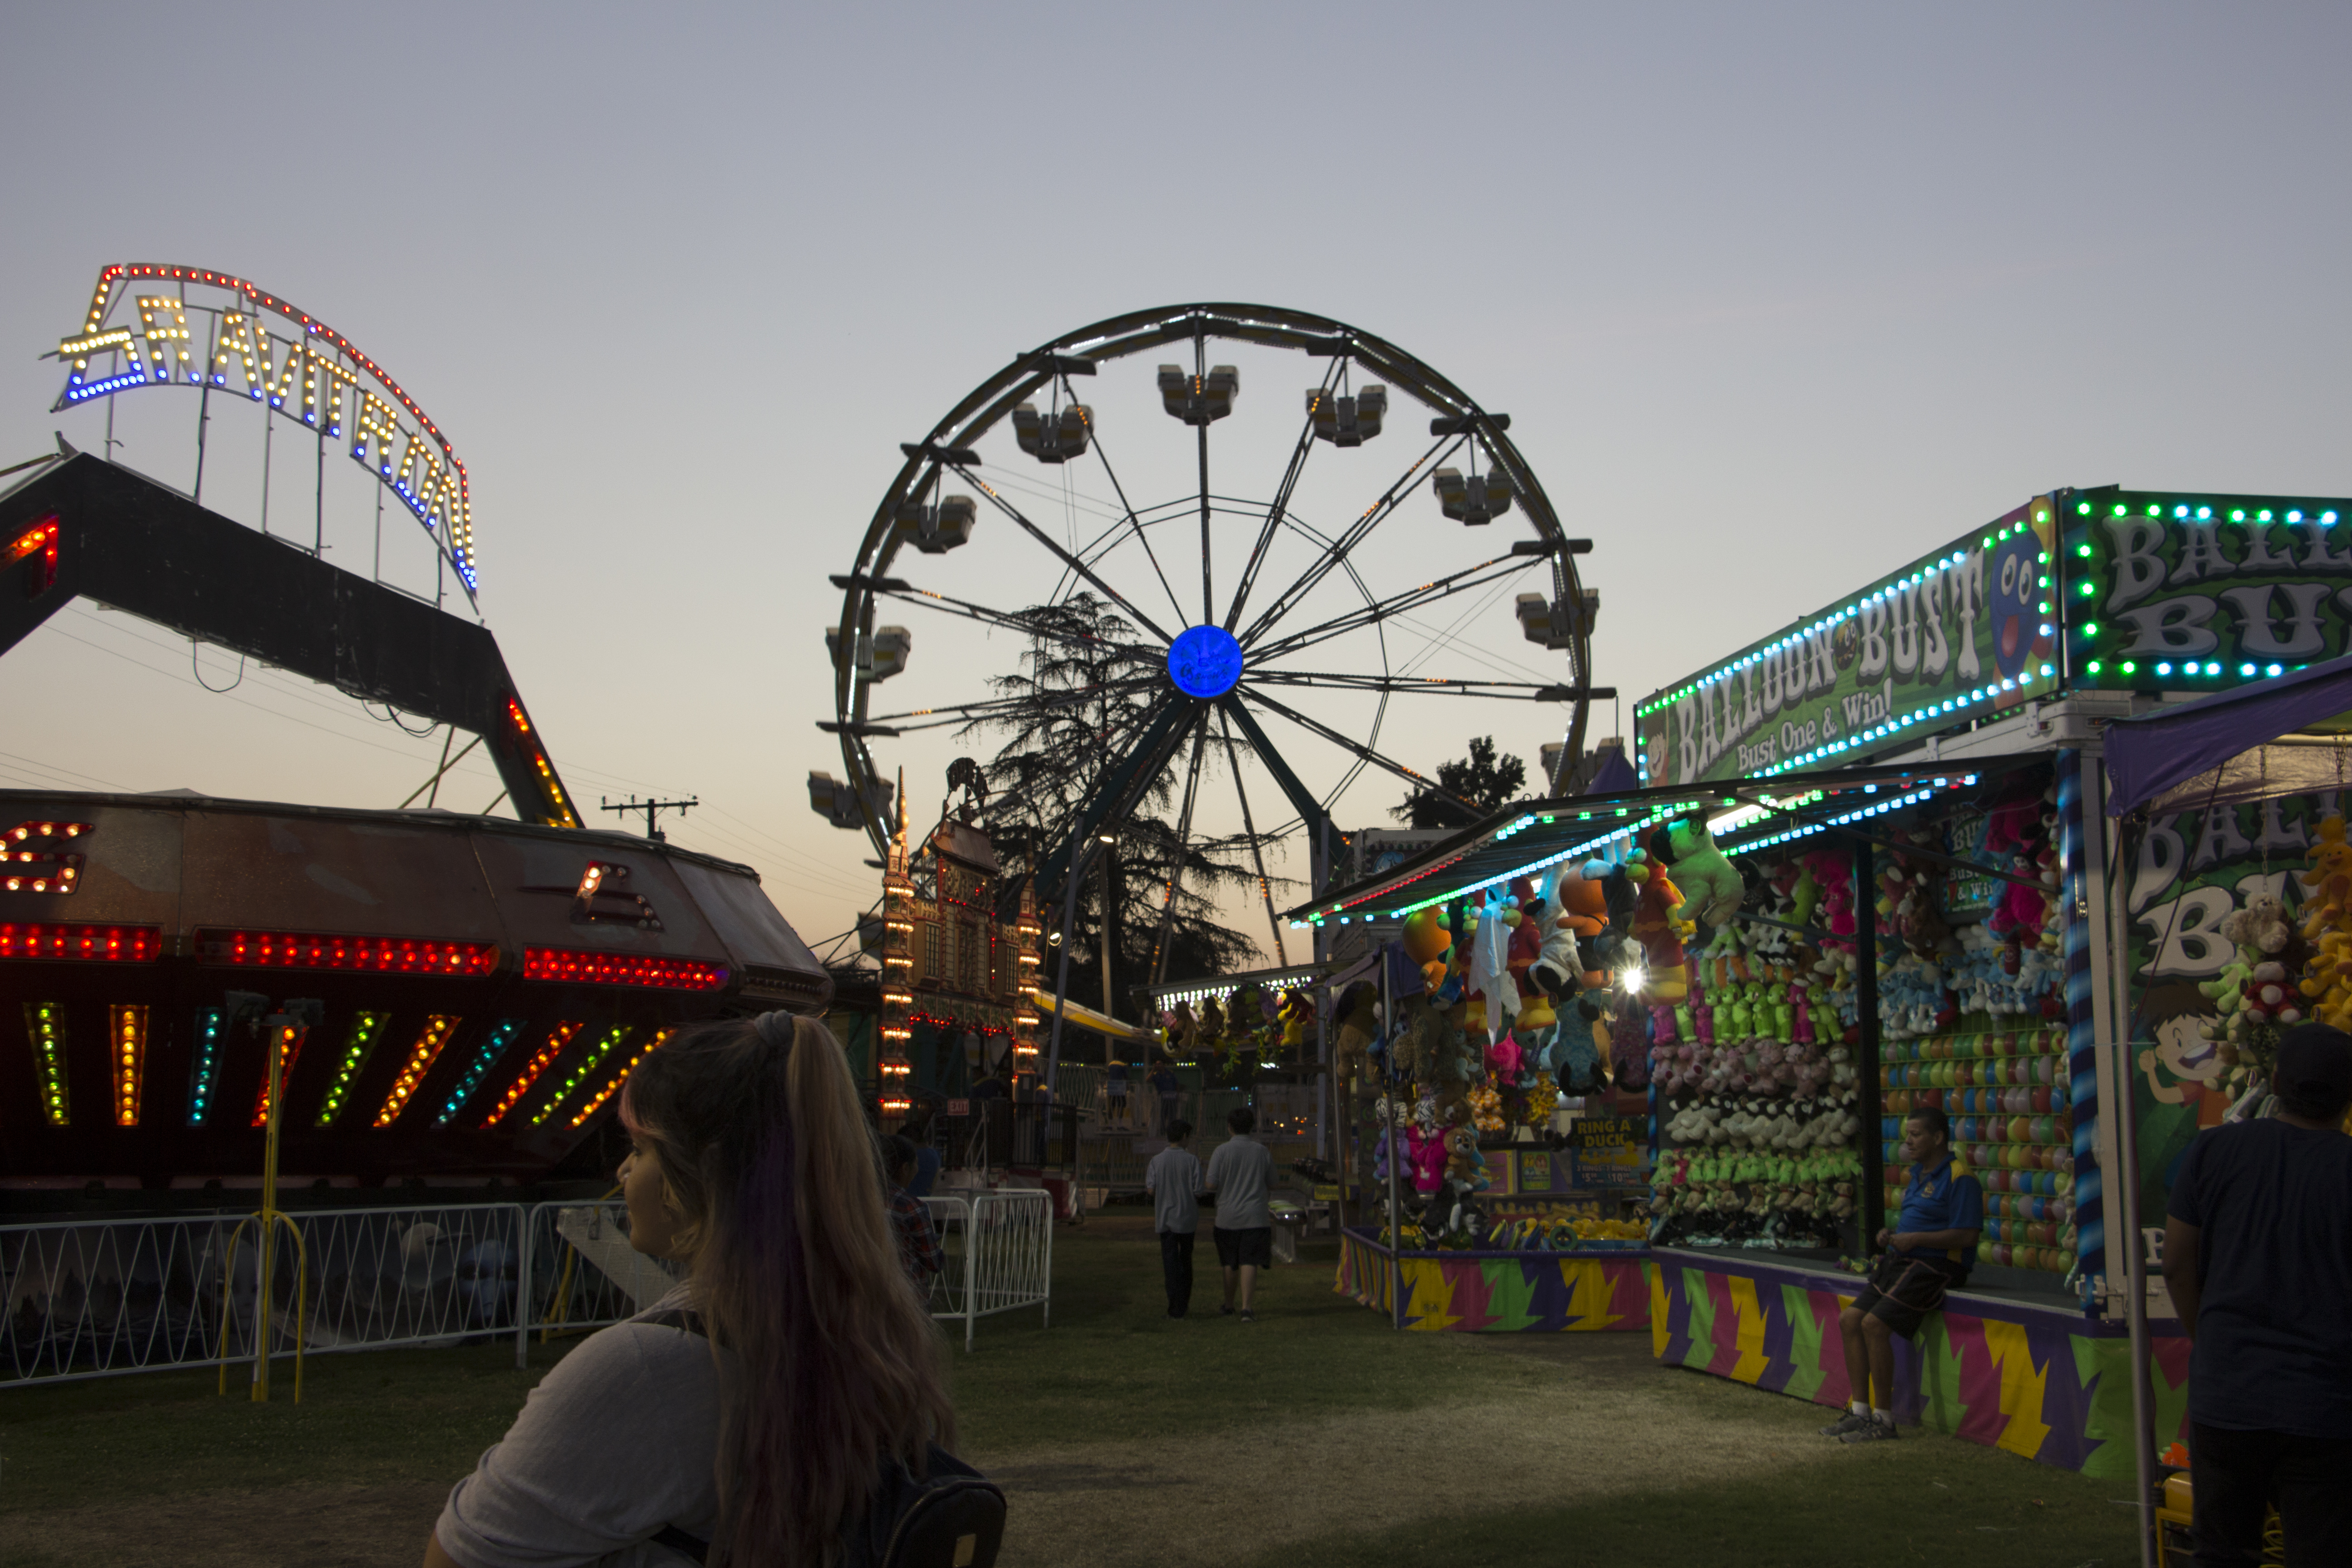 Review: Azusa’s Golden Days celebrates city’s history with carnival